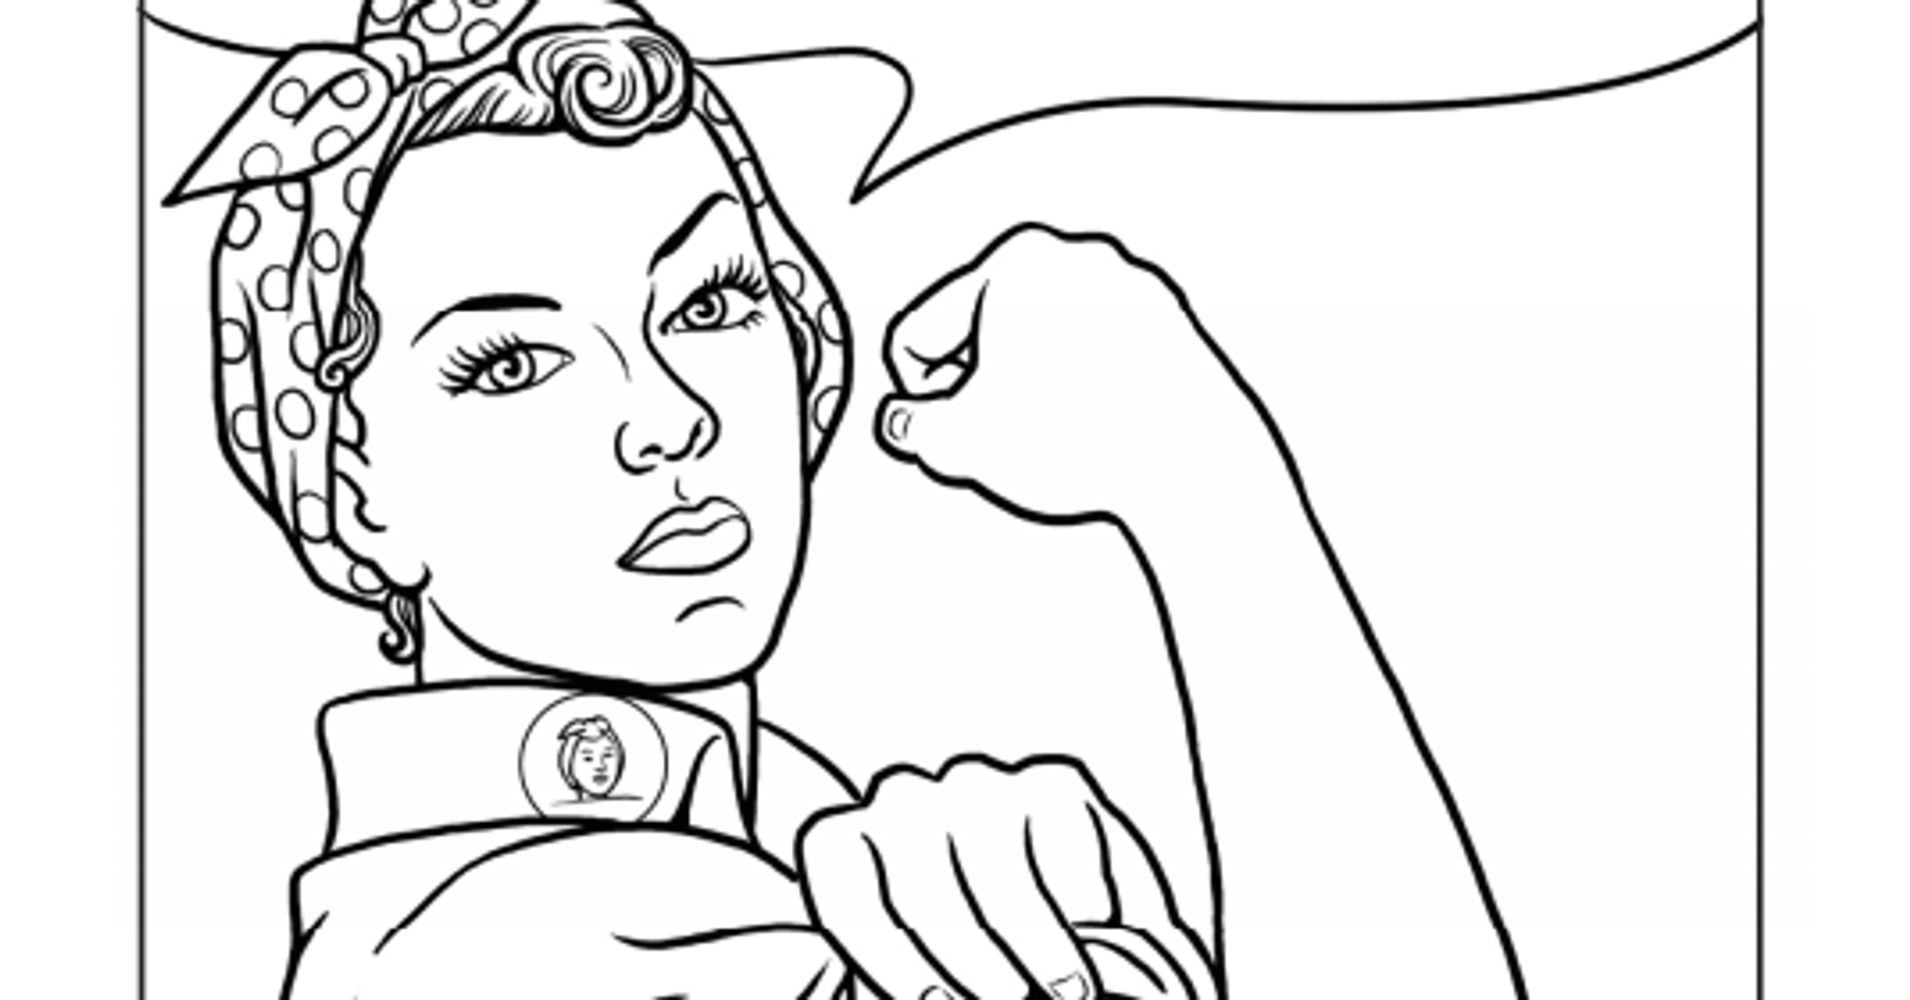 1000 Coloring Pages For Girls
 21 Printable Coloring Sheets That Celebrate Girl Power